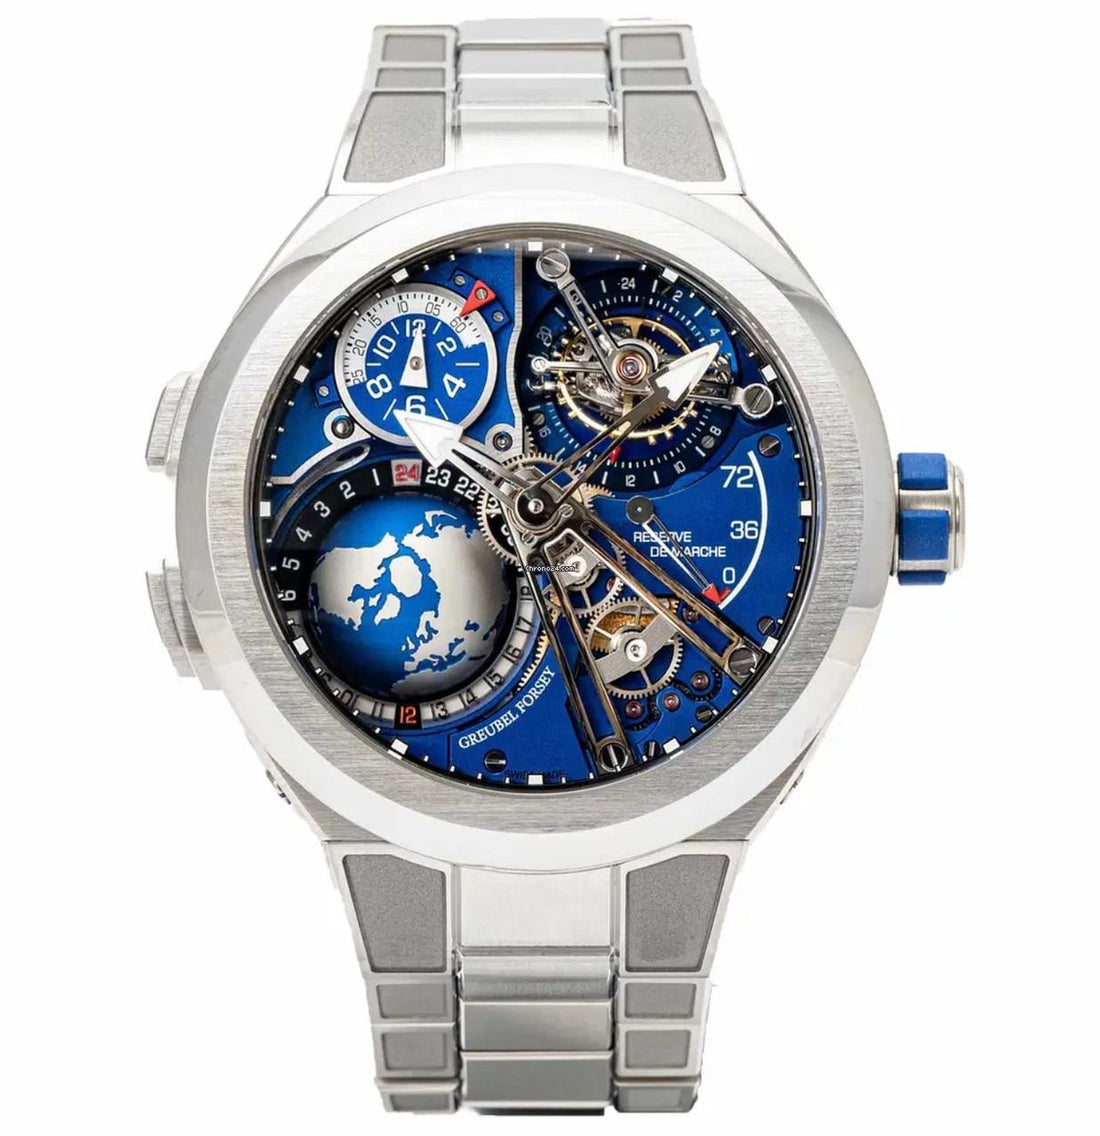 Greubel Forsey GMT SPORT Tourbillon Titanium 45mm Limited Edition 1 of 33 Limited Edition